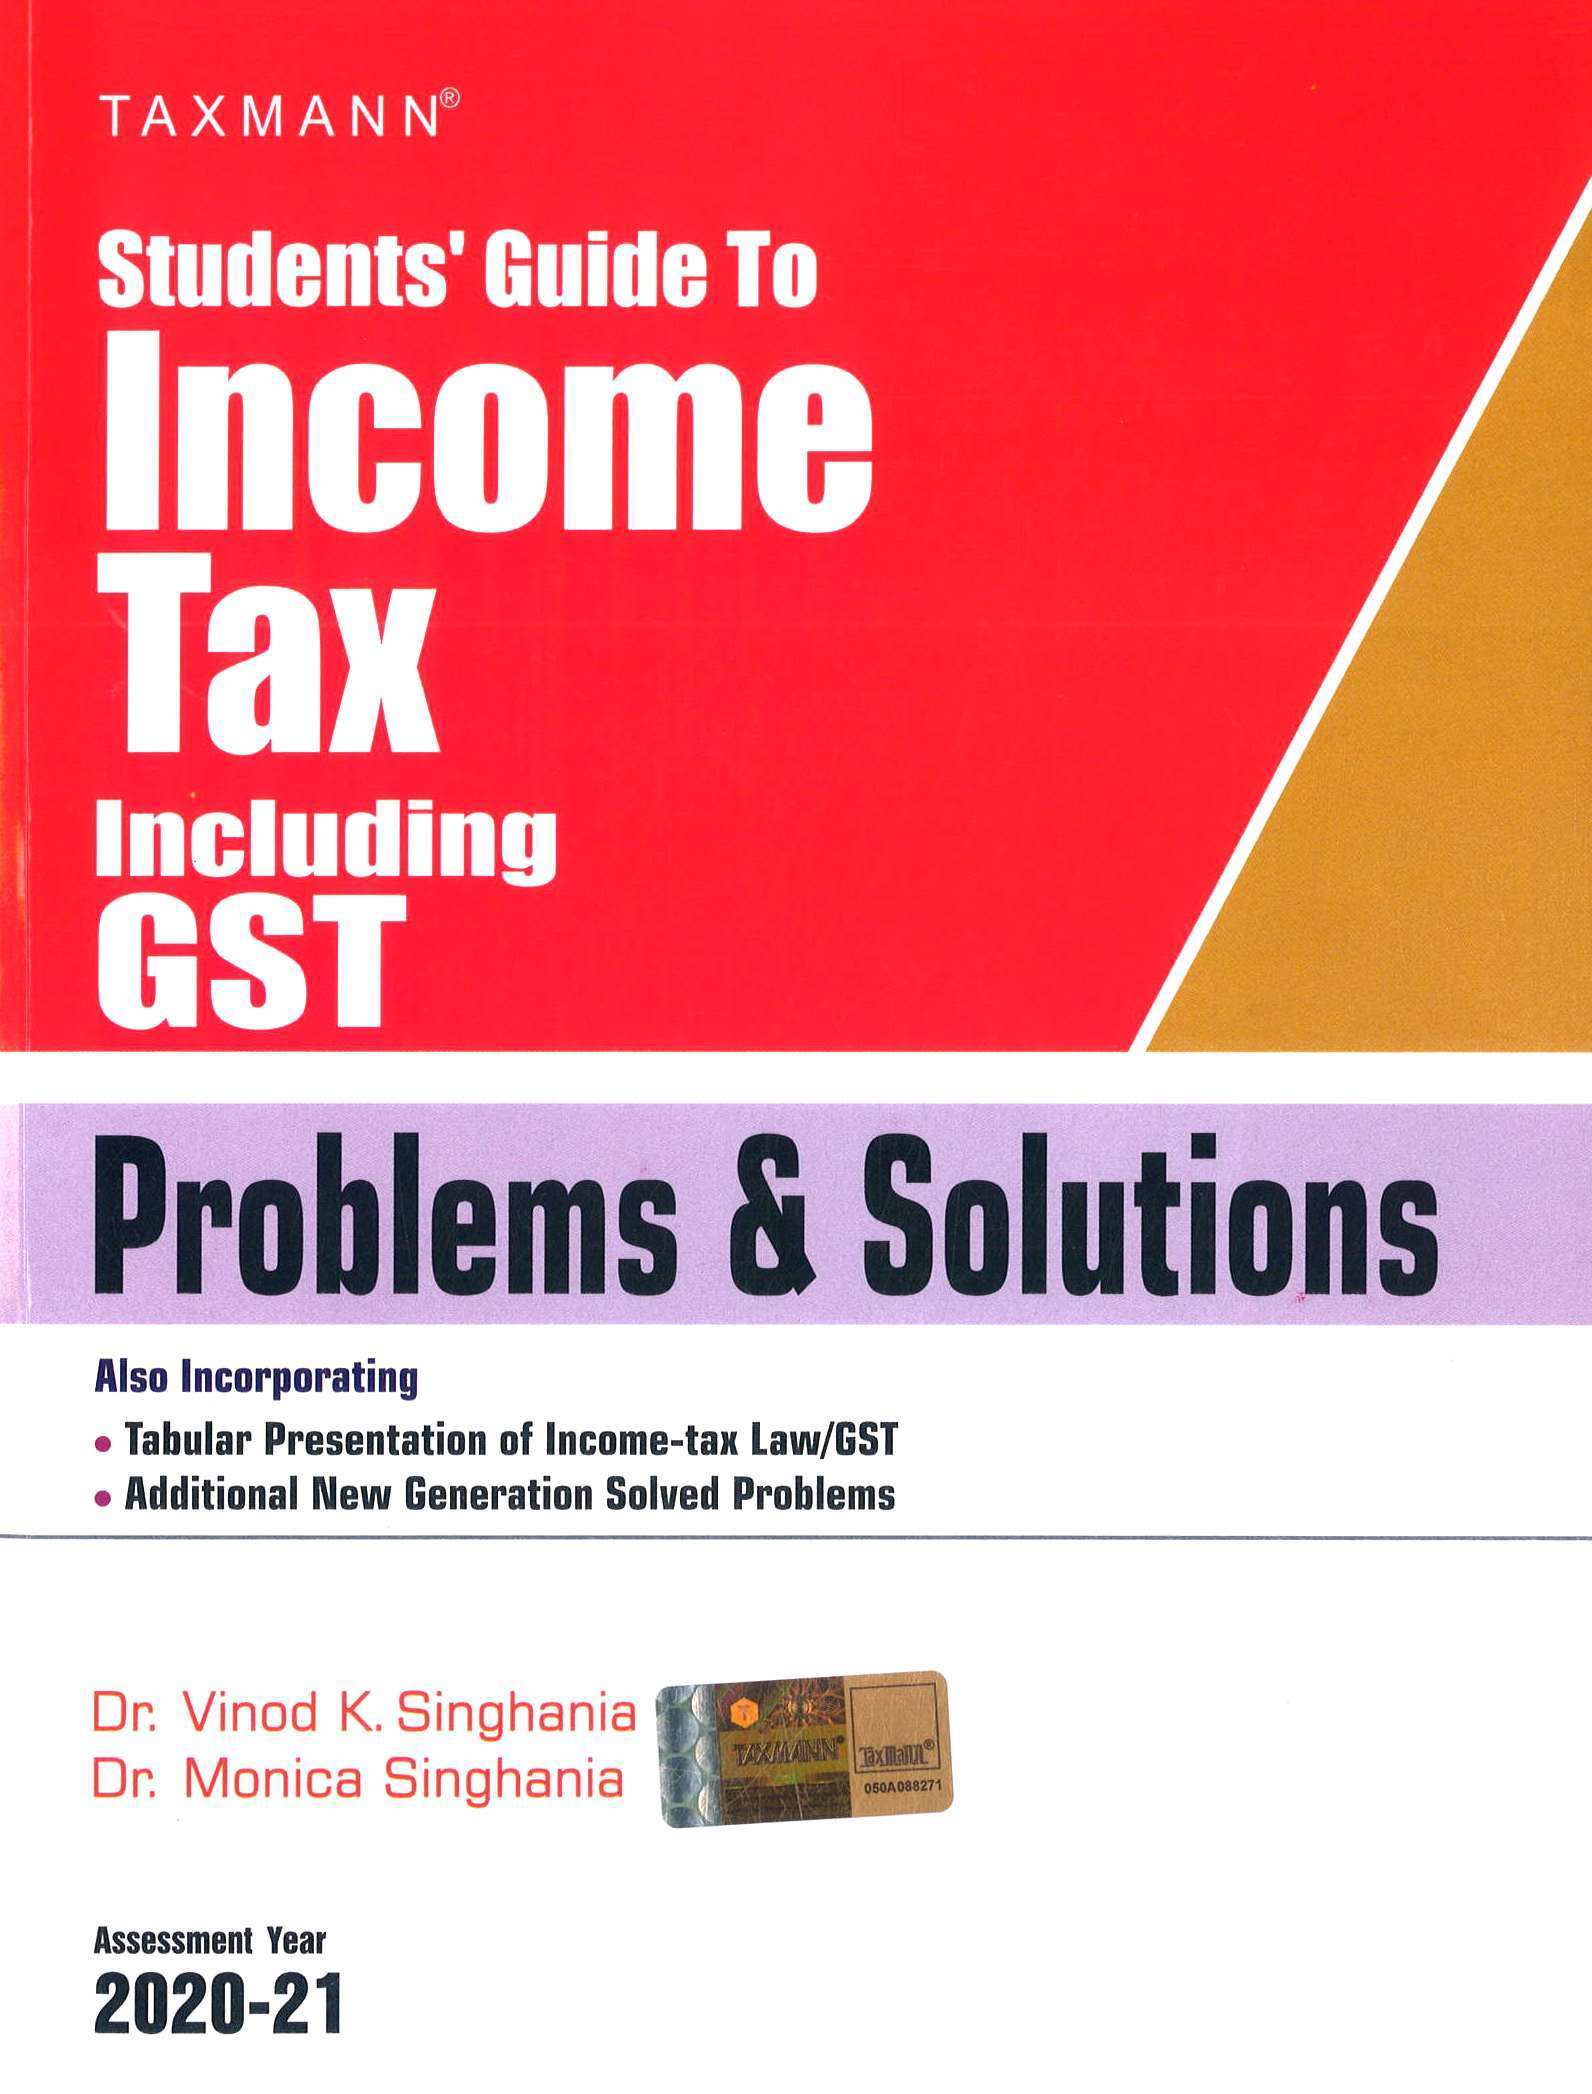 CA Inter VK Singhania Students Guide to Income Tax with Problems and Solutions Combo for May 2020 Exams